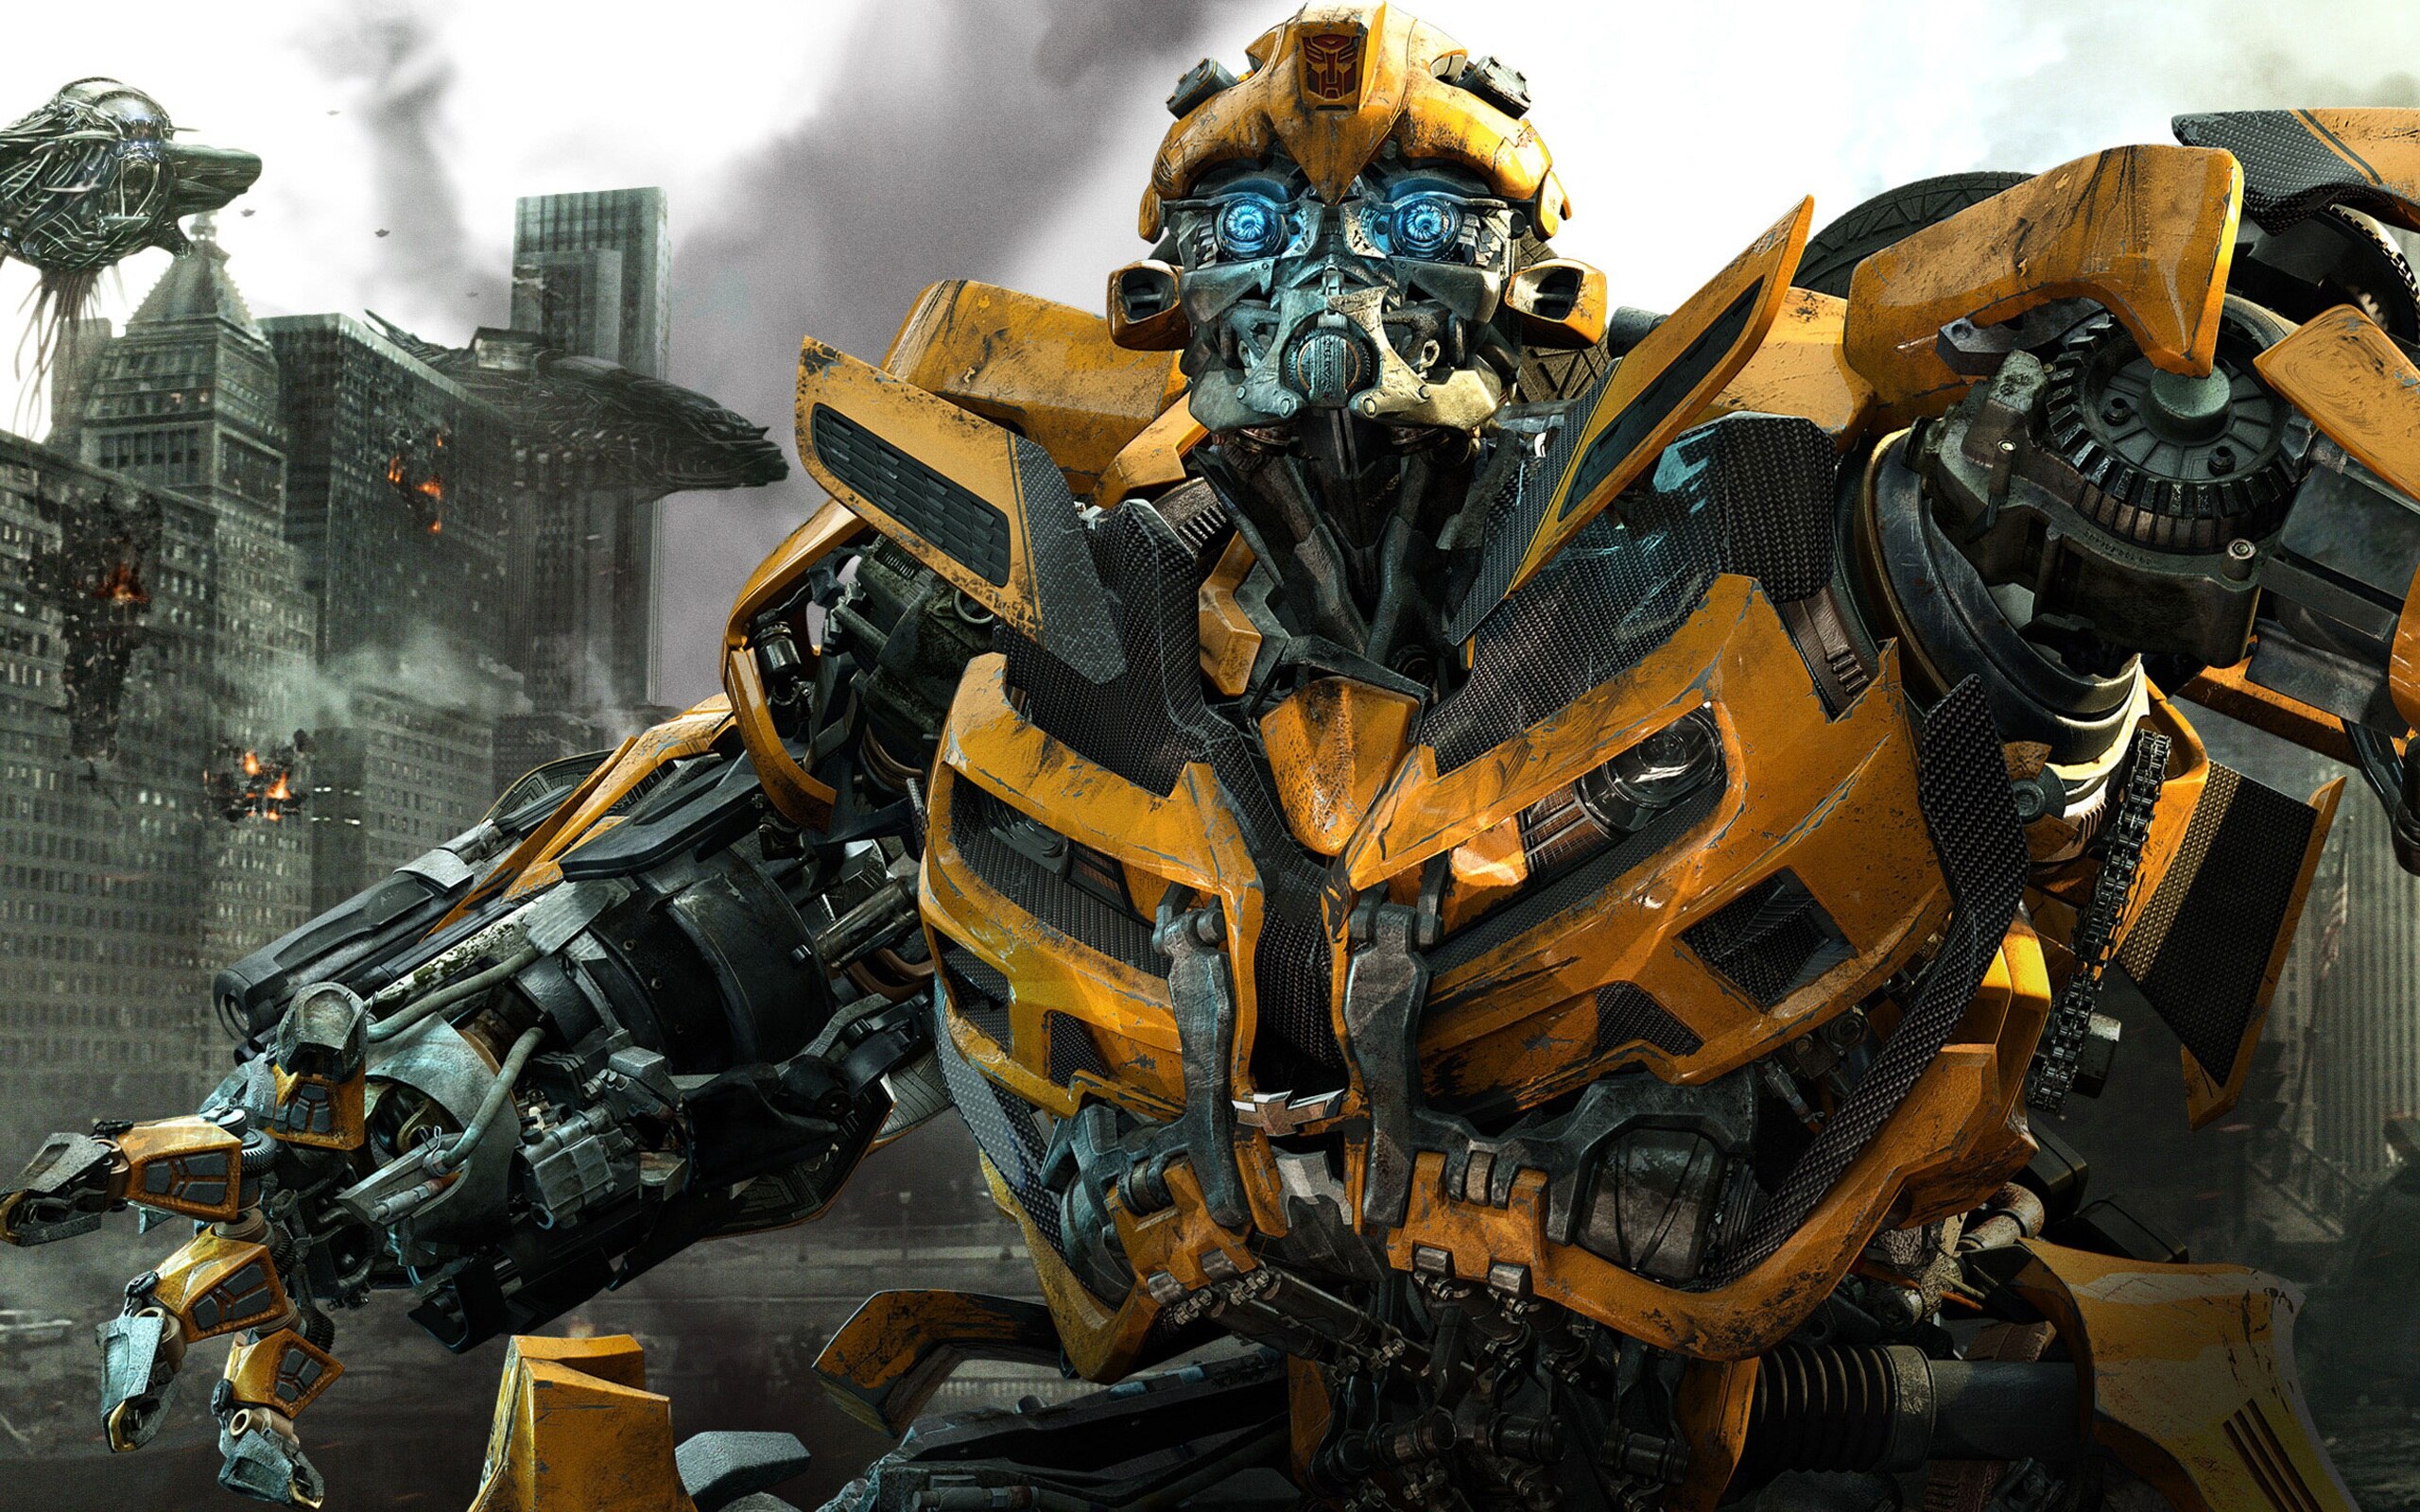 Animated Transformers Prequel Set On Cybertron Reportedly In Images, Photos, Reviews